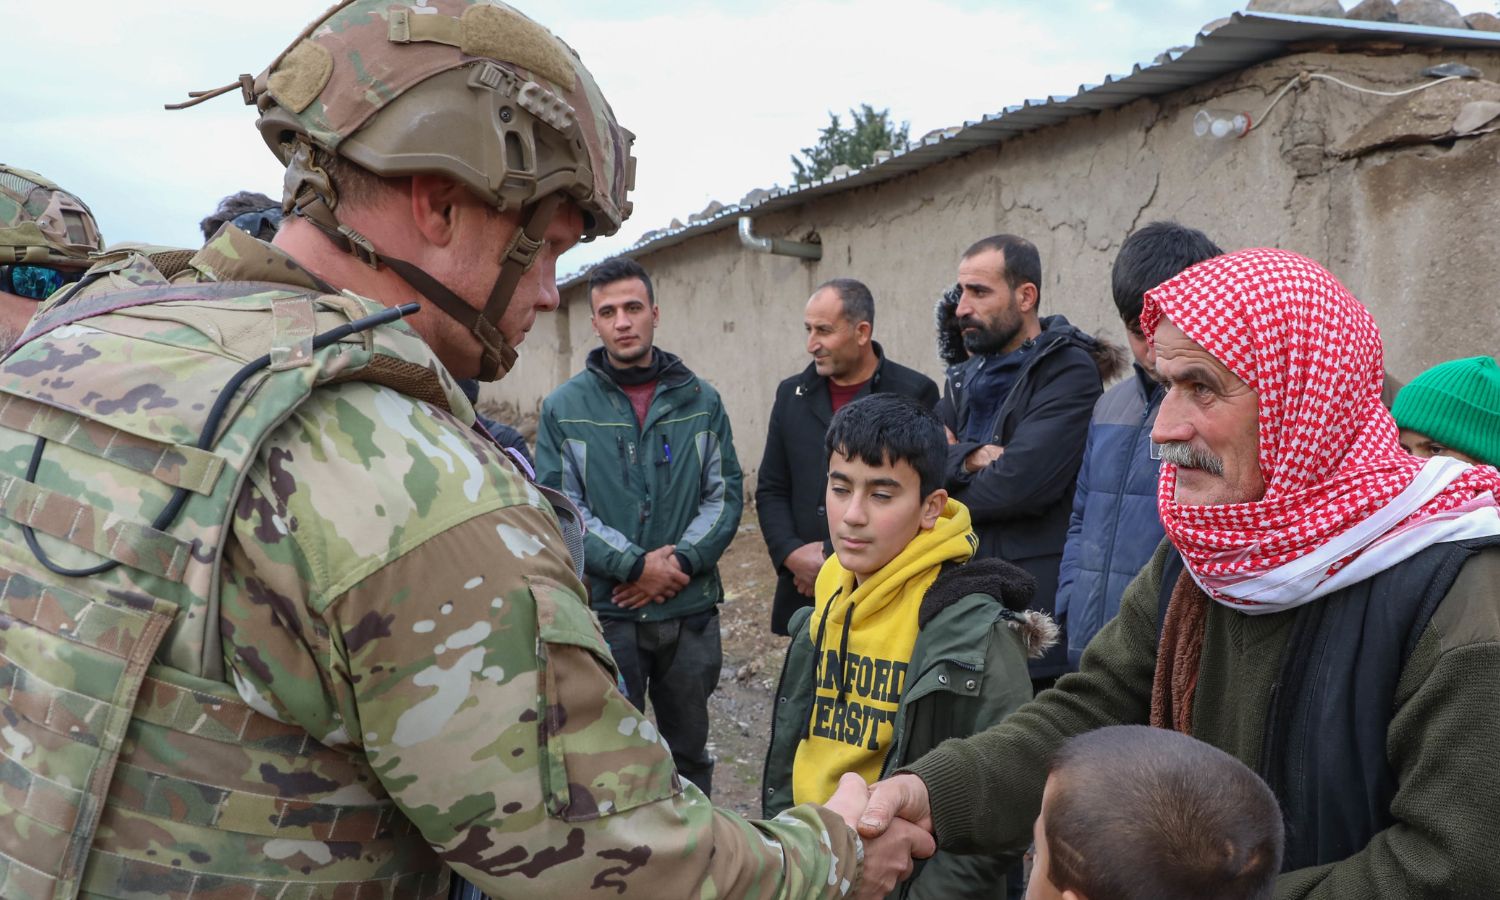 A US army soldier alongside residents from the eastern region of Syria - December 23, 2022 (CENTCOM)